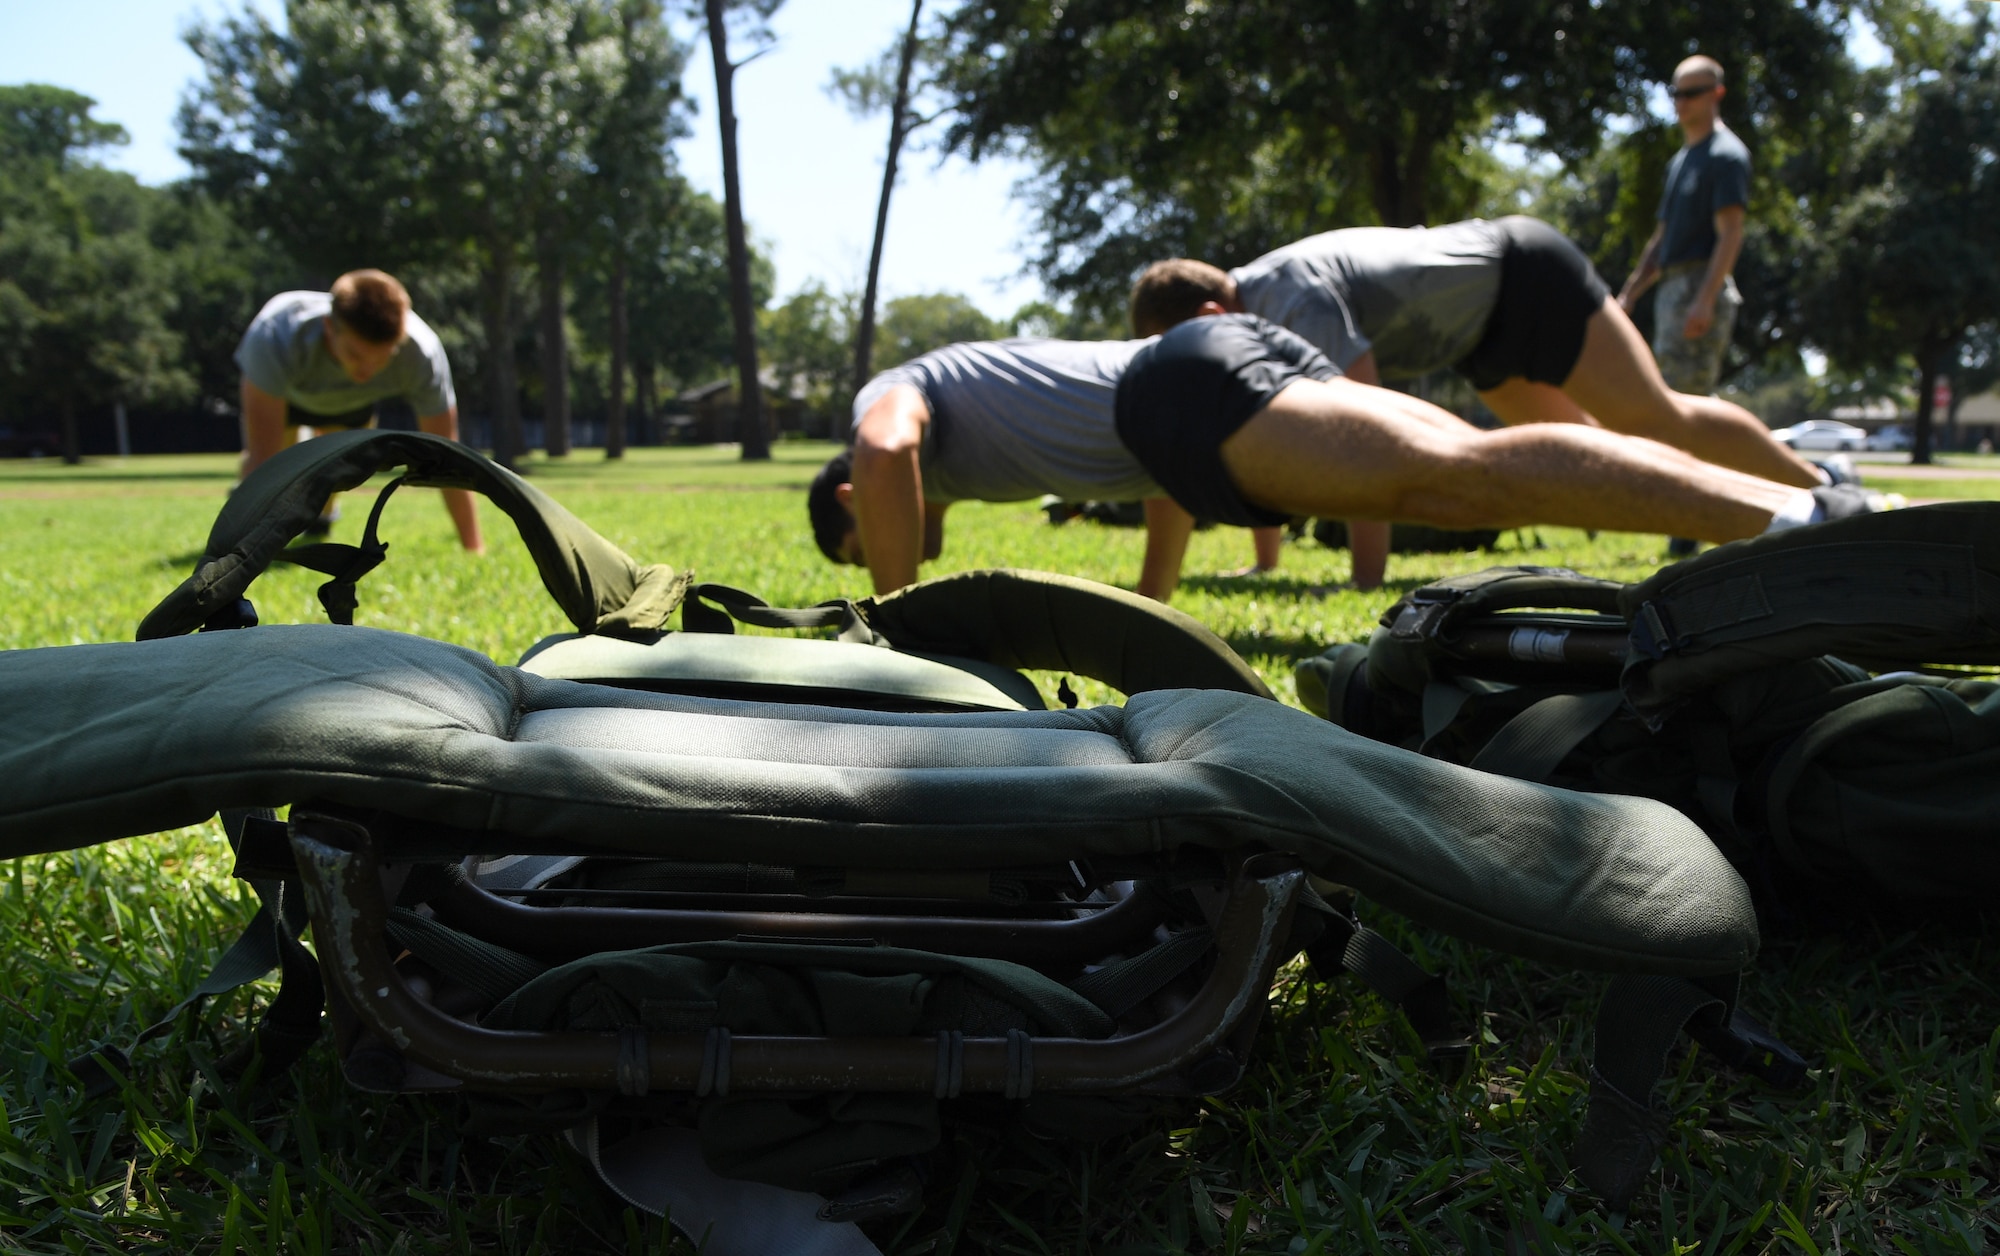 Ruck sacks are displayed on the ground during the 81st Security Forces Squadron Defender's Challenge Ruck near the Crotwell Track on Keesler Air Force Base, Mississippi, Aug. 16, 2019. The competition, consisting of 11 four-person teams, completing seven obstacles, was one of several events in recognition of The Year of the Defender. (U.S. Air Force photo by Kemberly Groue)